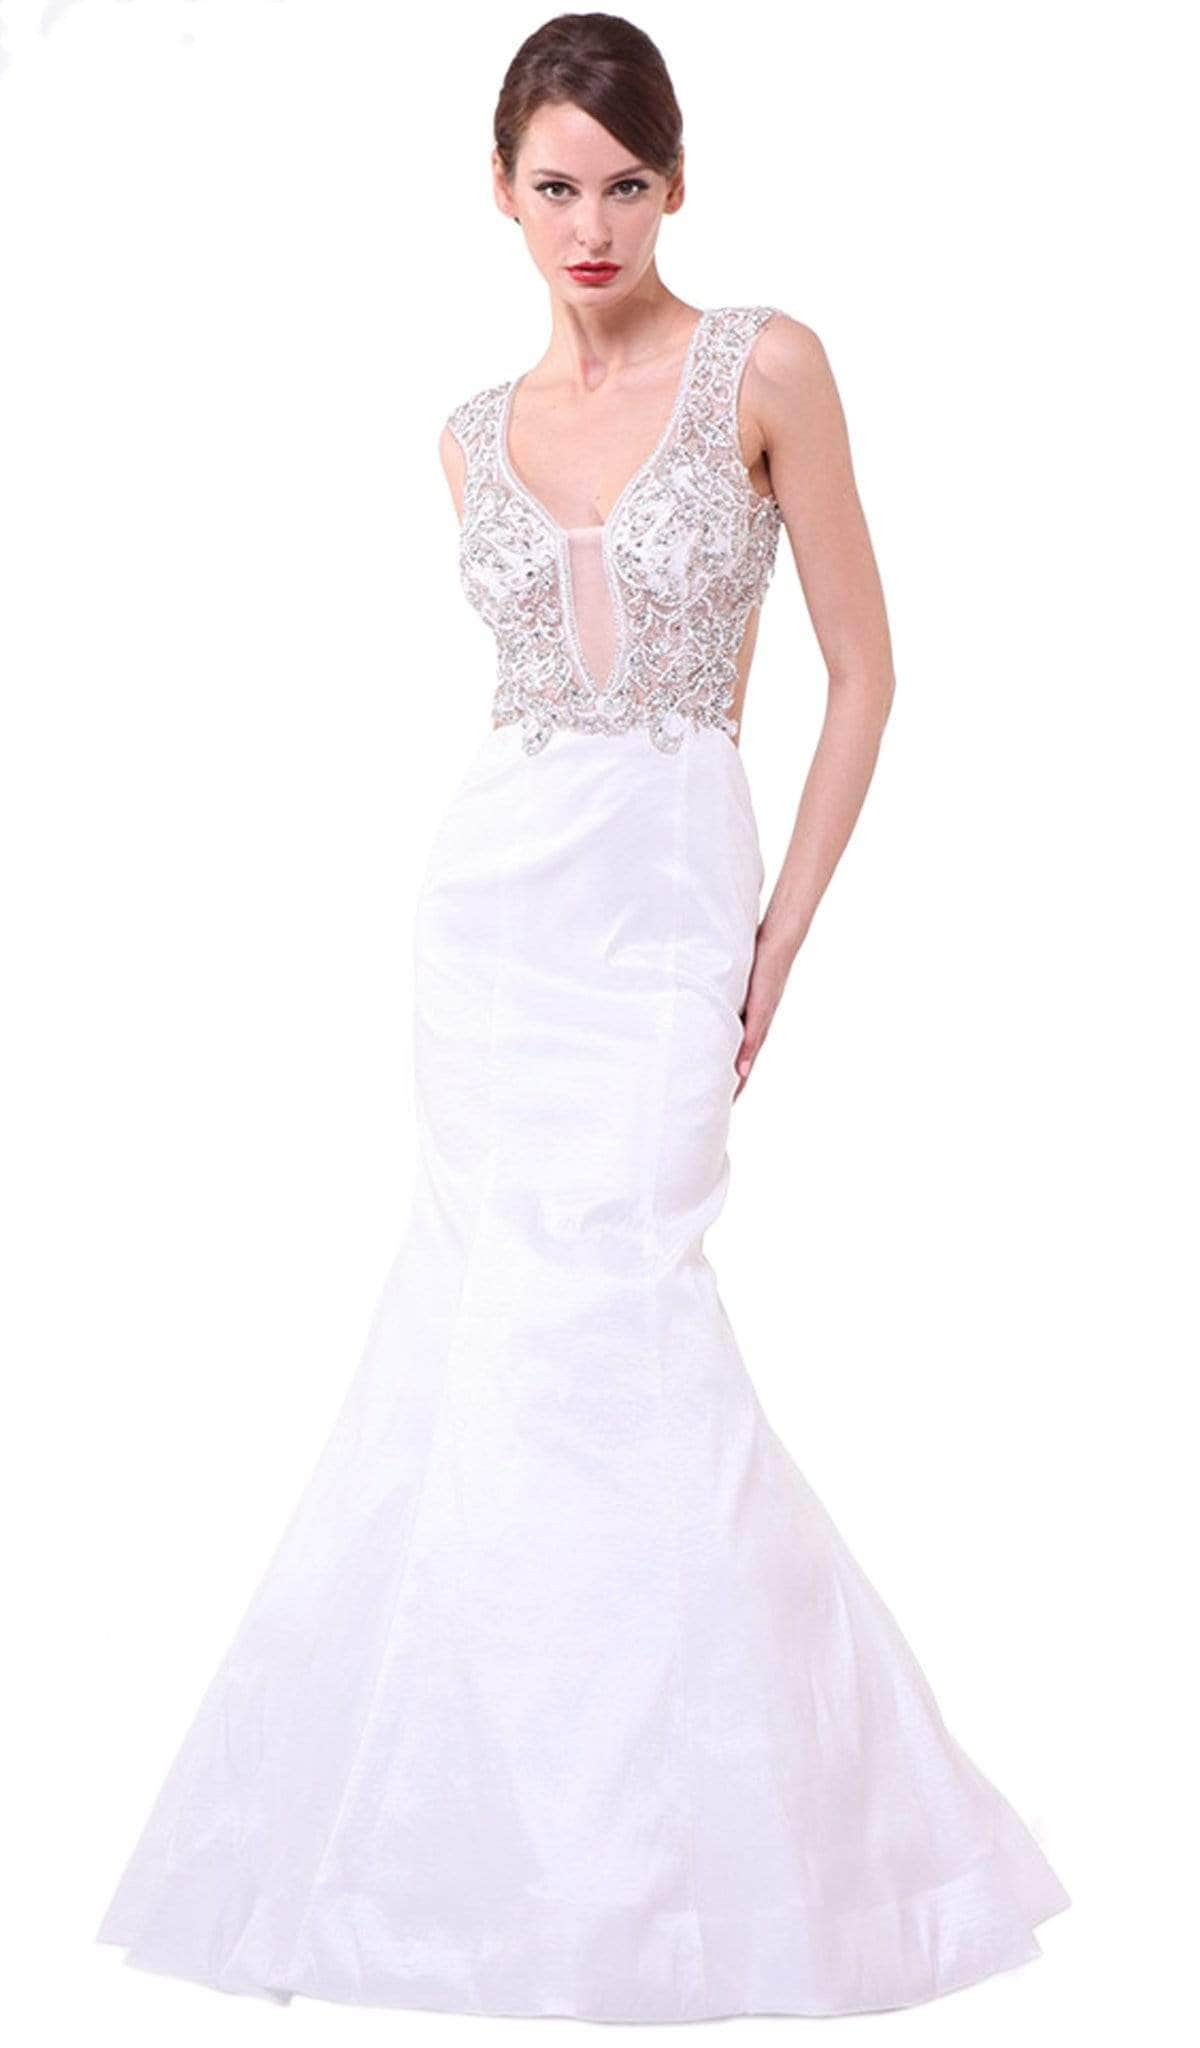 Ladivine, Ladivine 8788 - Plunging Illusion Notched Embellished Long Gown